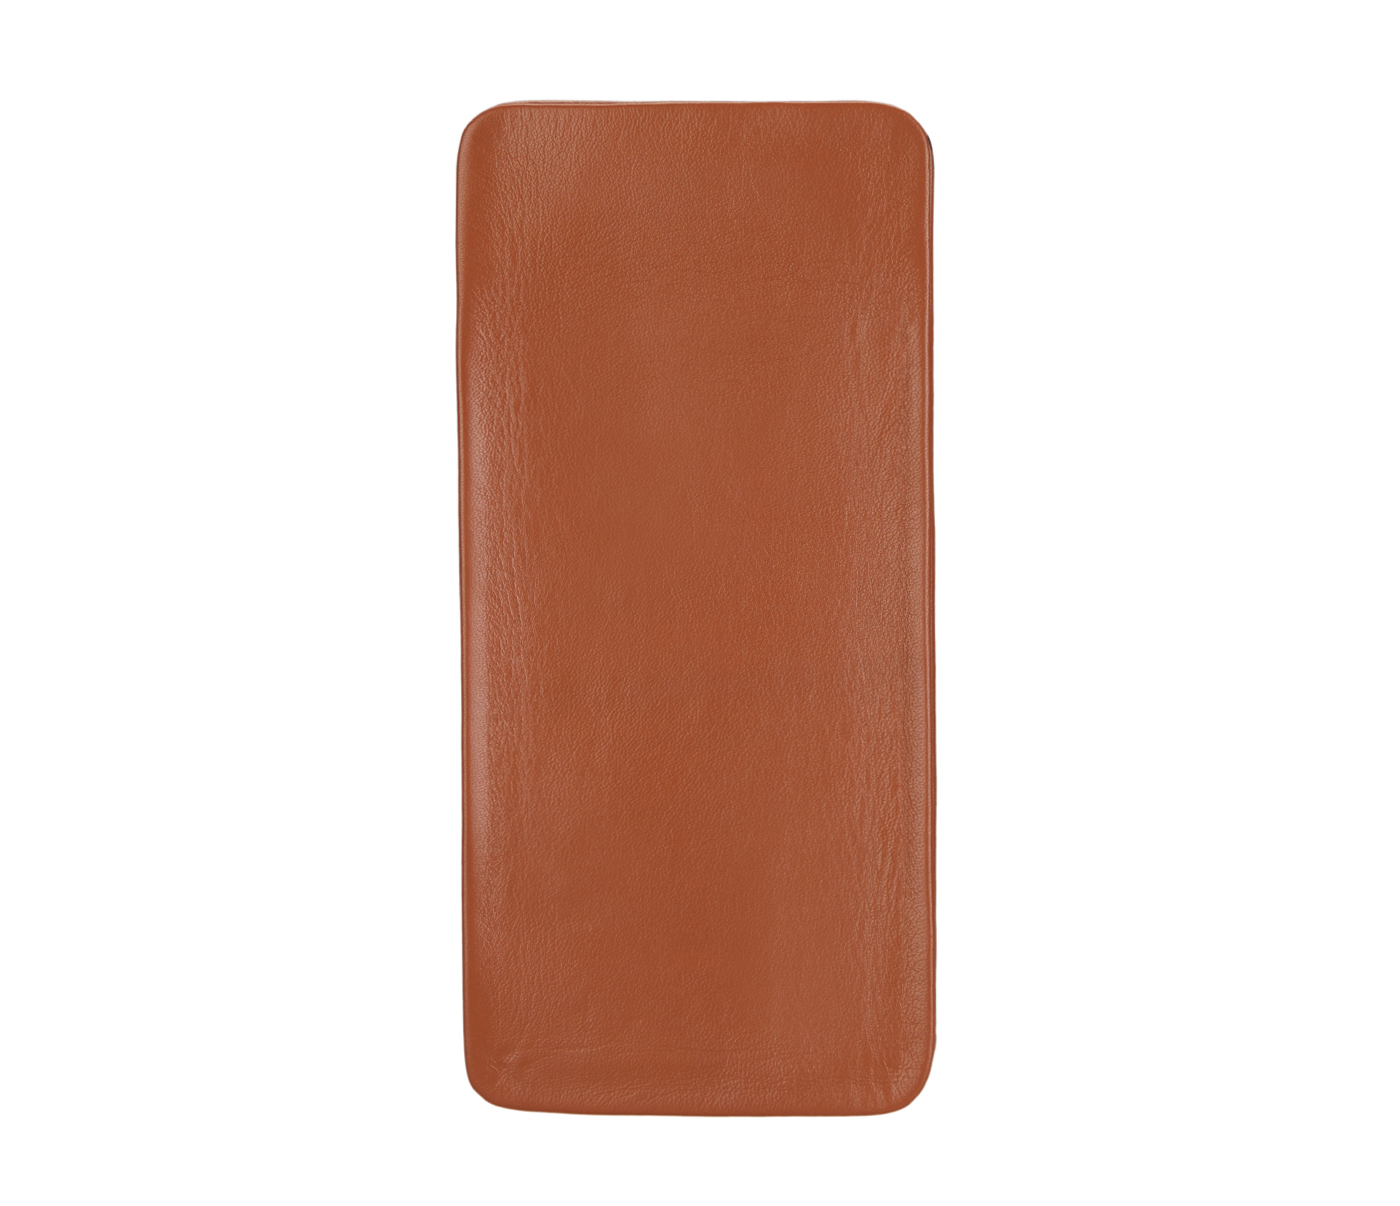 Spectacle Case--Soft stitch free spectacle case in Genuine Leather - Tan